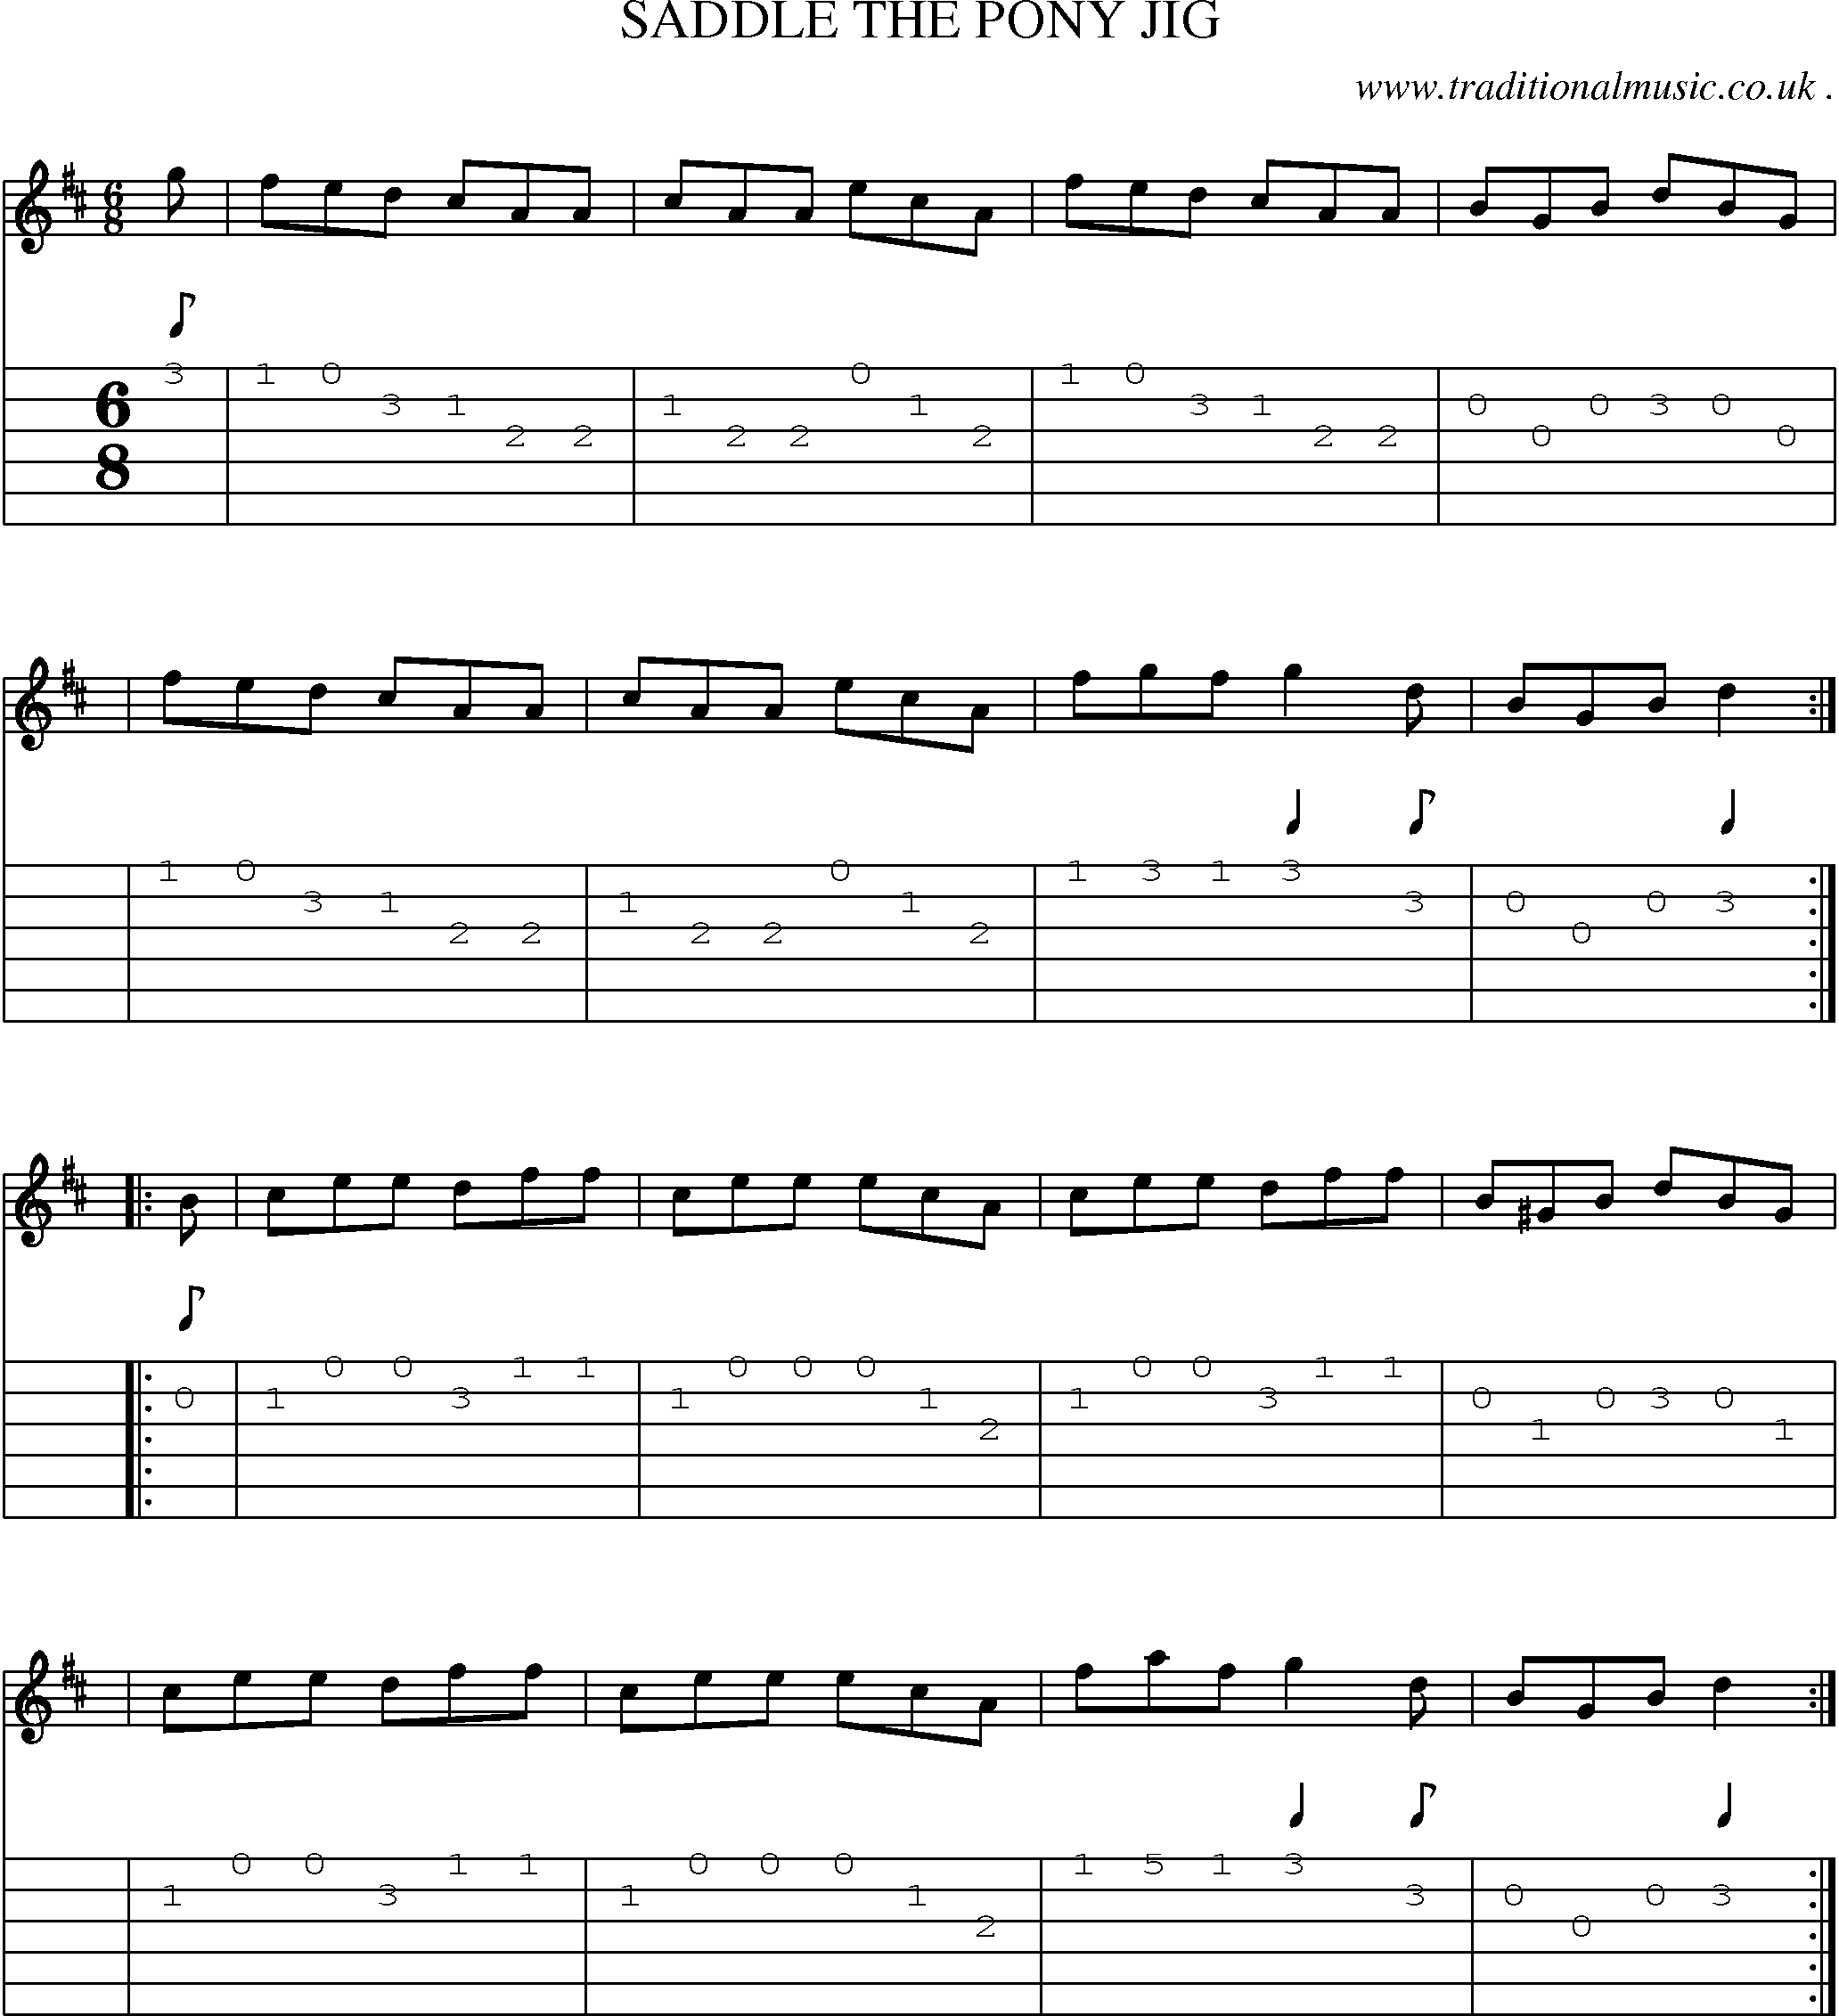 Sheet-Music and Guitar Tabs for Saddle The Pony Jig